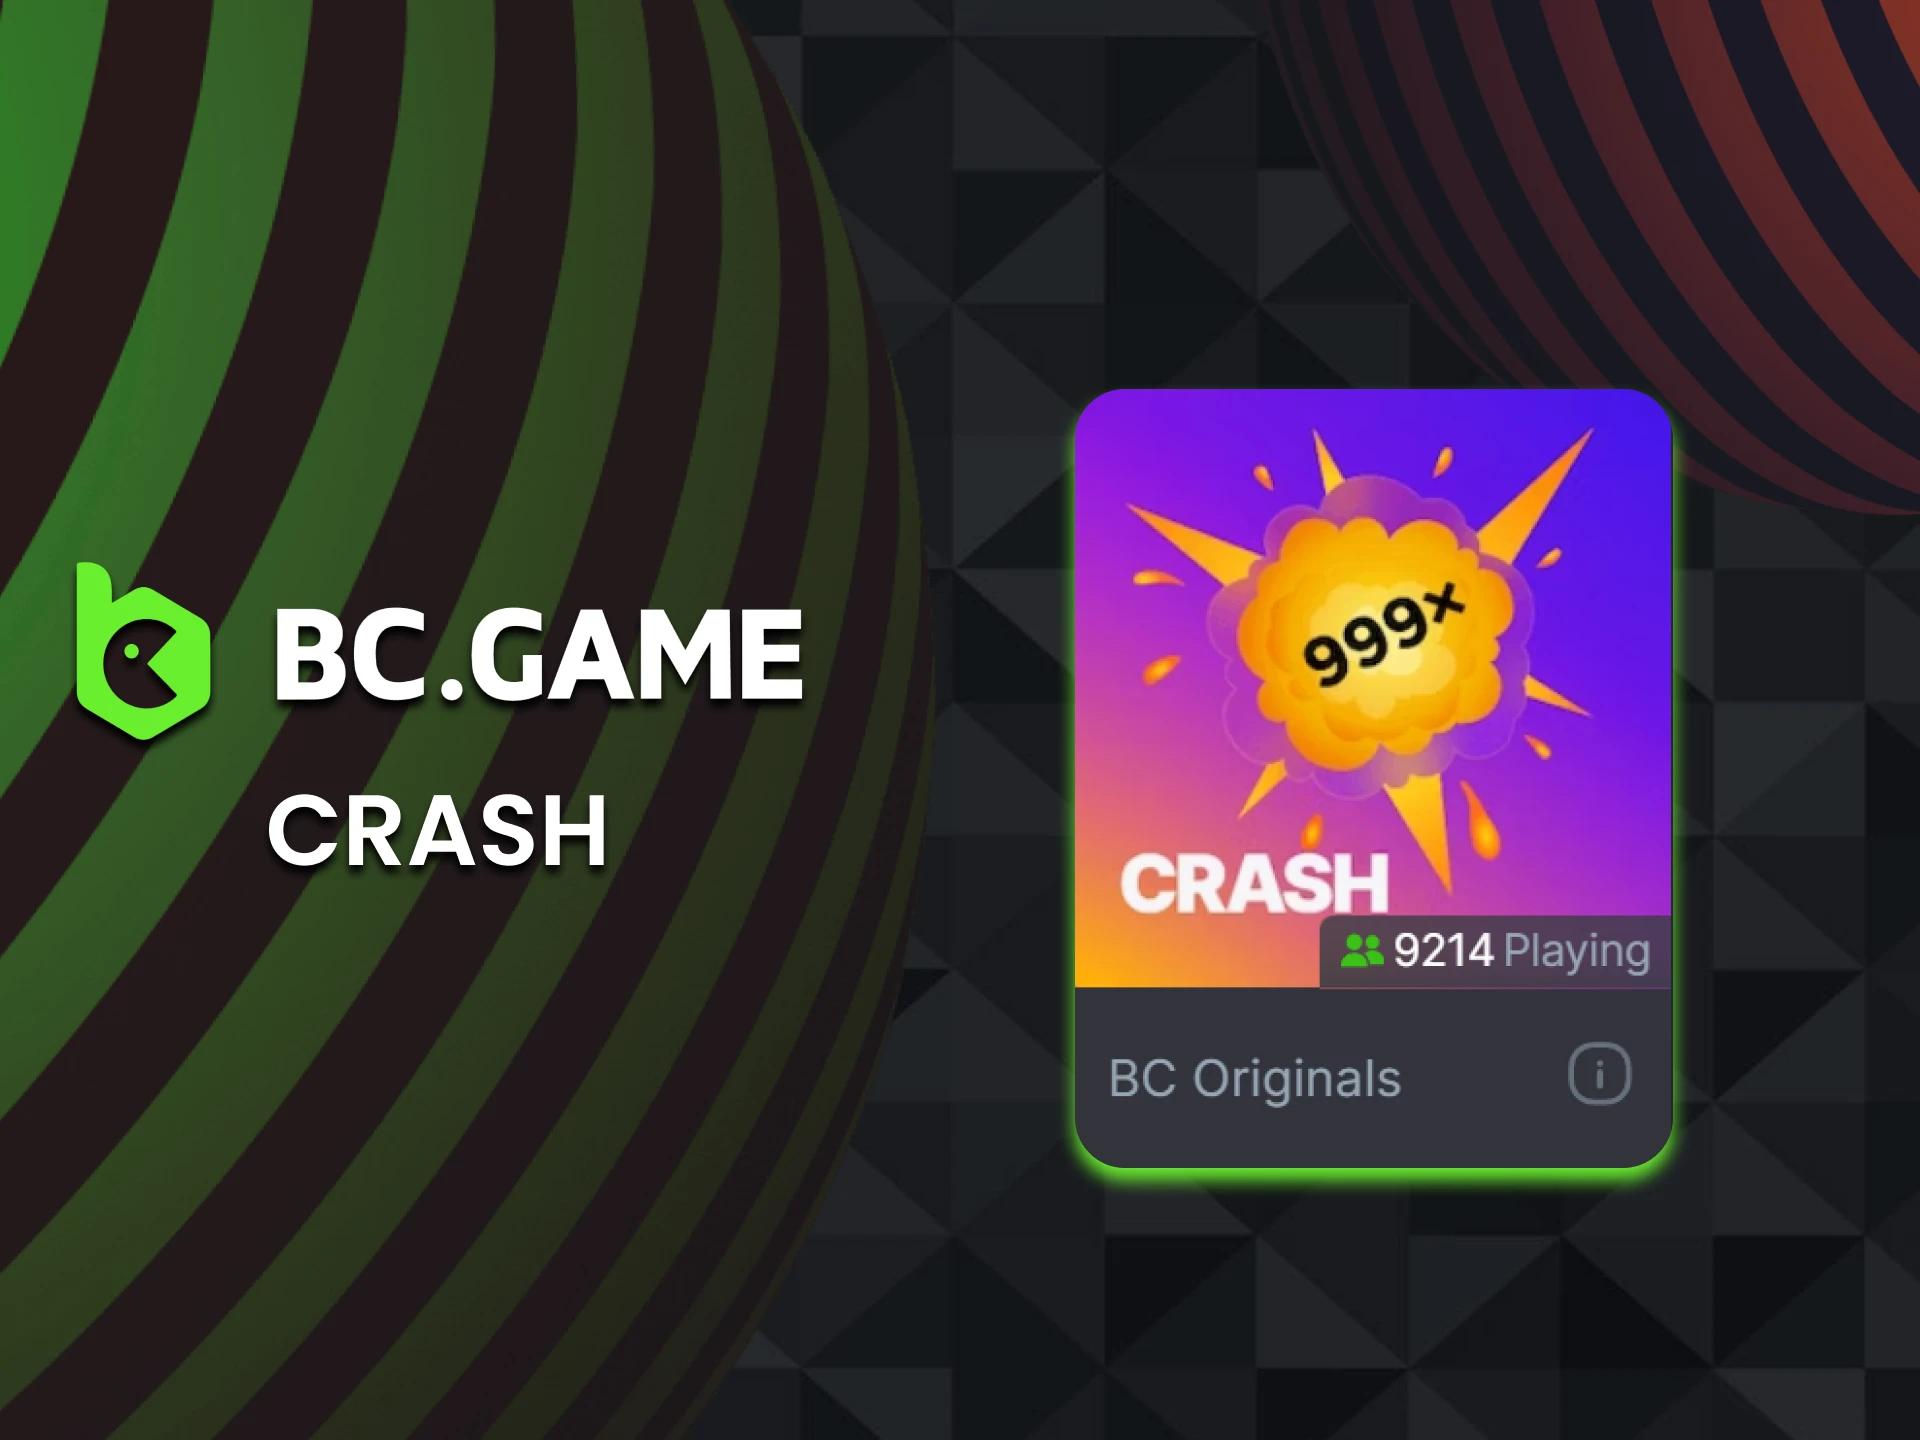 There are many different Crash games at BC Game casino.